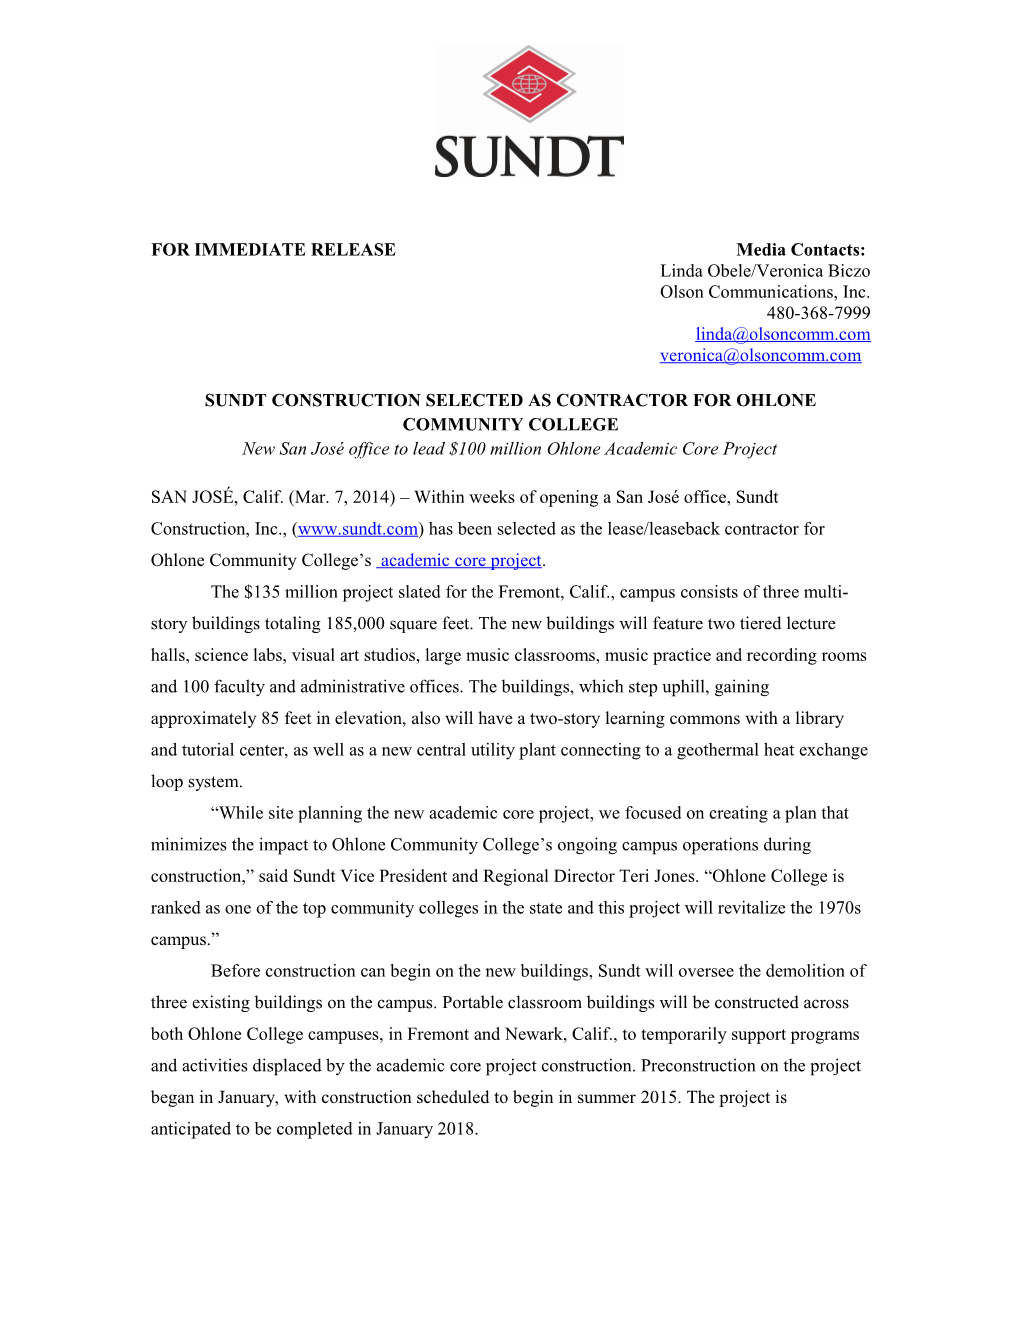 Sundt Construction Selected As Contractor for Ohlone Community College